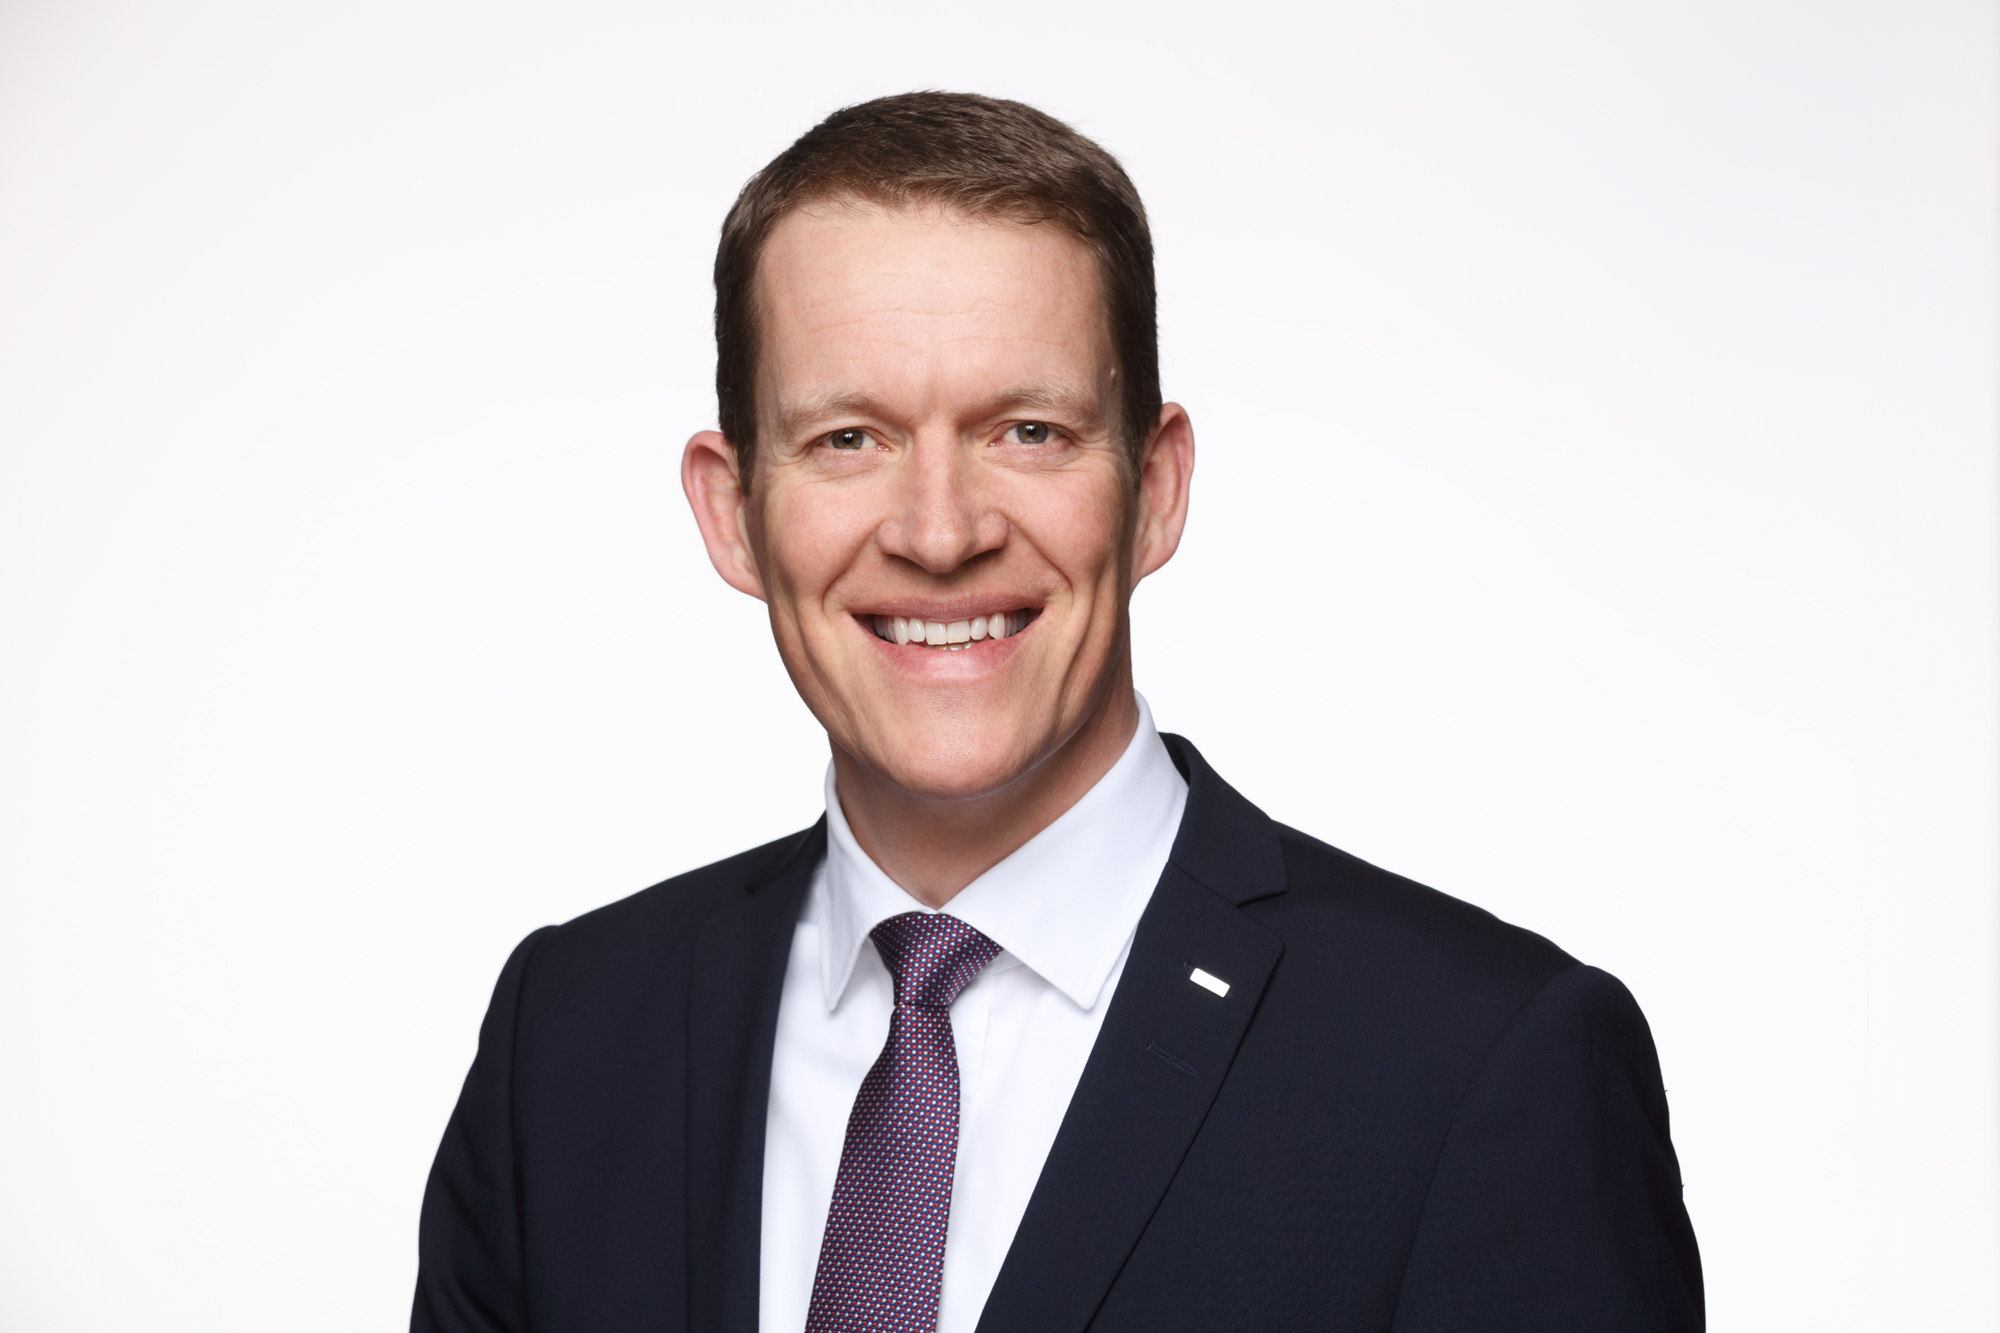 Burkhard Eling takes up role of CEO at DACHSER